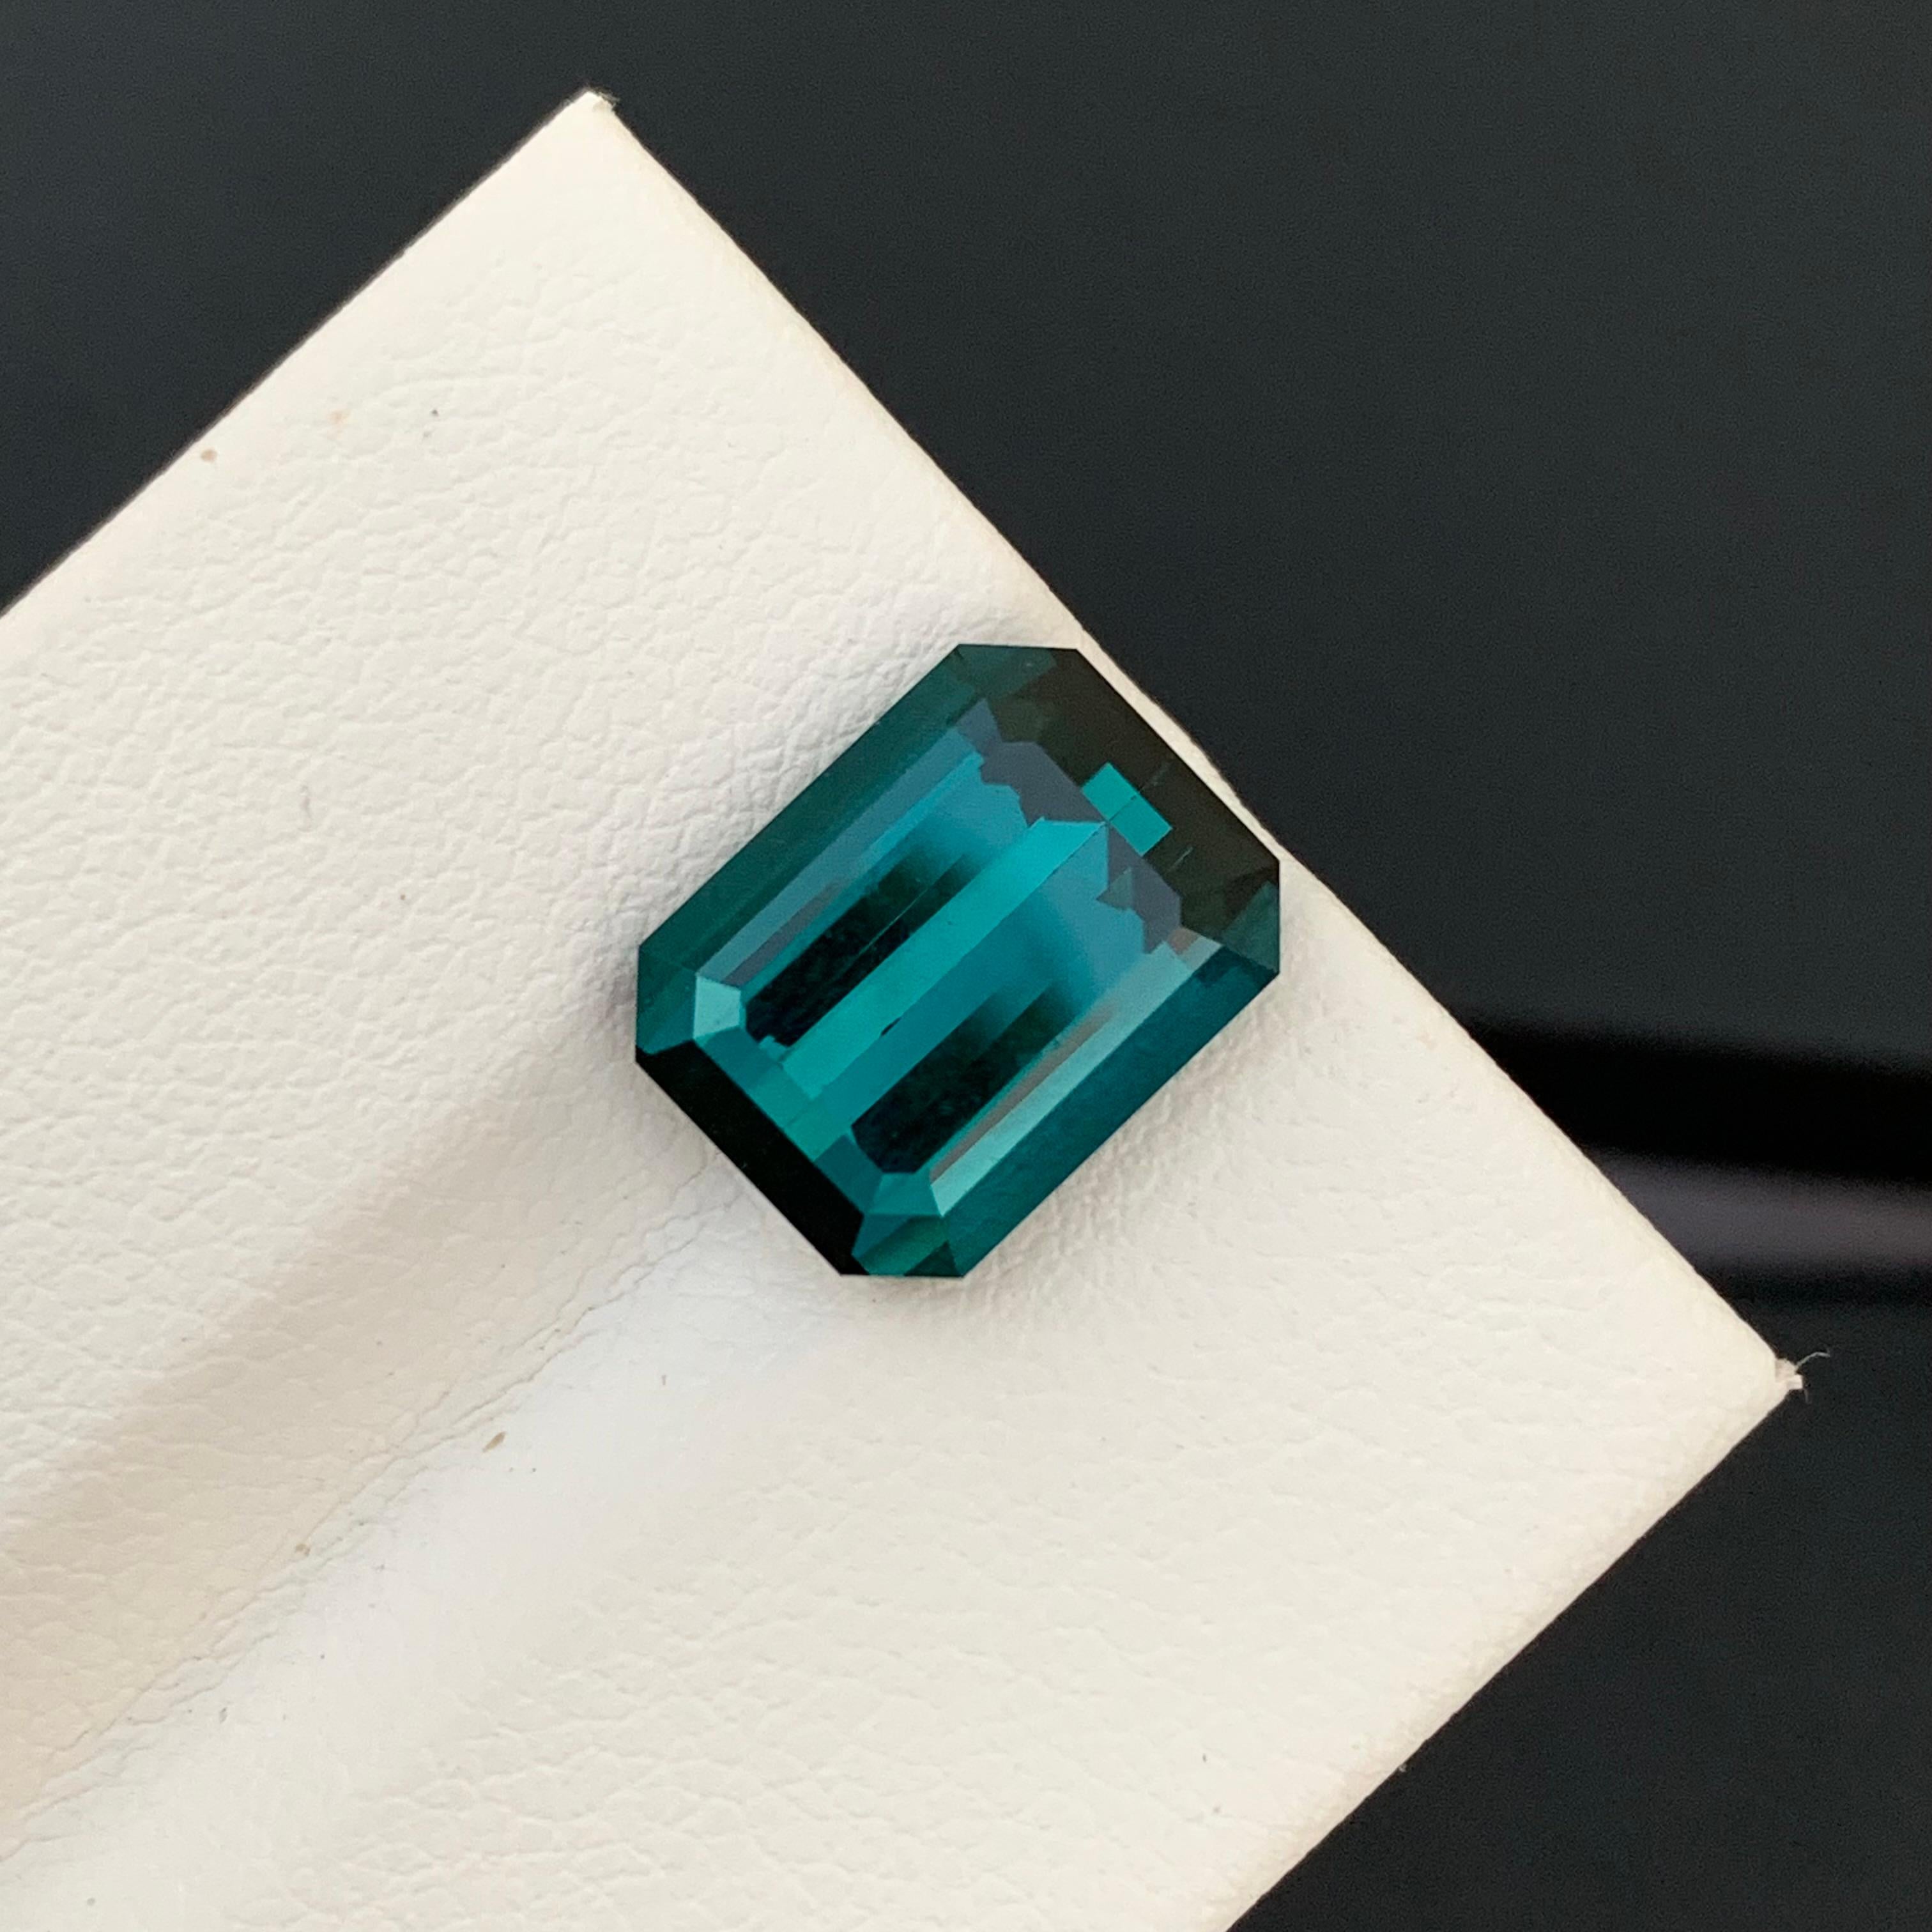 Loose Indicolite Tourmaline
Weight: 5.35 Carats
Dimension: 11.3 x 8.7 x 6.2 Mm
Colour: Blue
Origin: Afghanistan
Treatment: Non
Certificate: On Demand

Indicolite tourmaline, prized for its stunning blue hues ranging from serene sky blues to deep